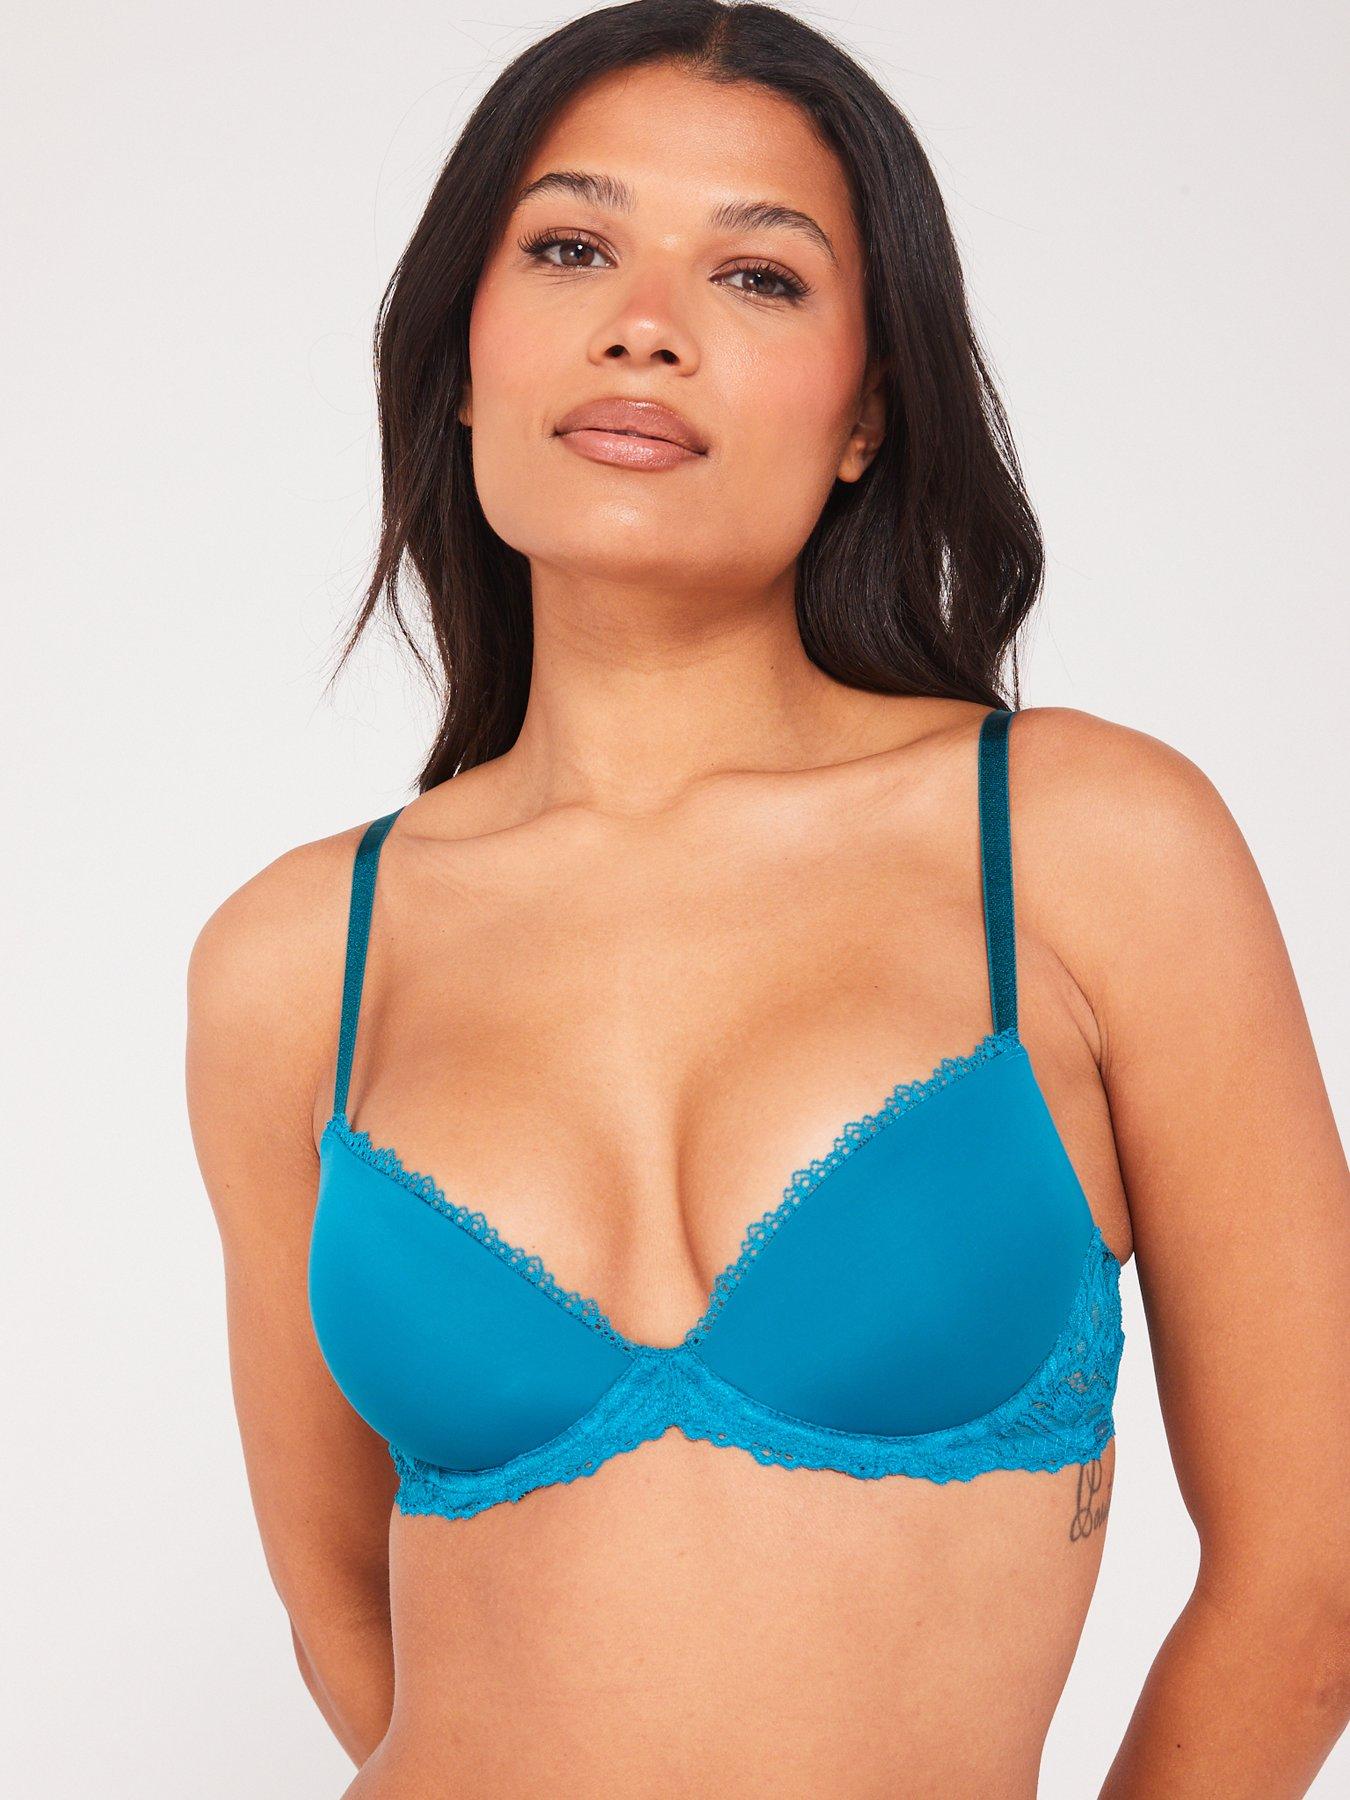 Buy A-GG Turquoise Supersoft Lace Full Cup Padded Bra - 38D